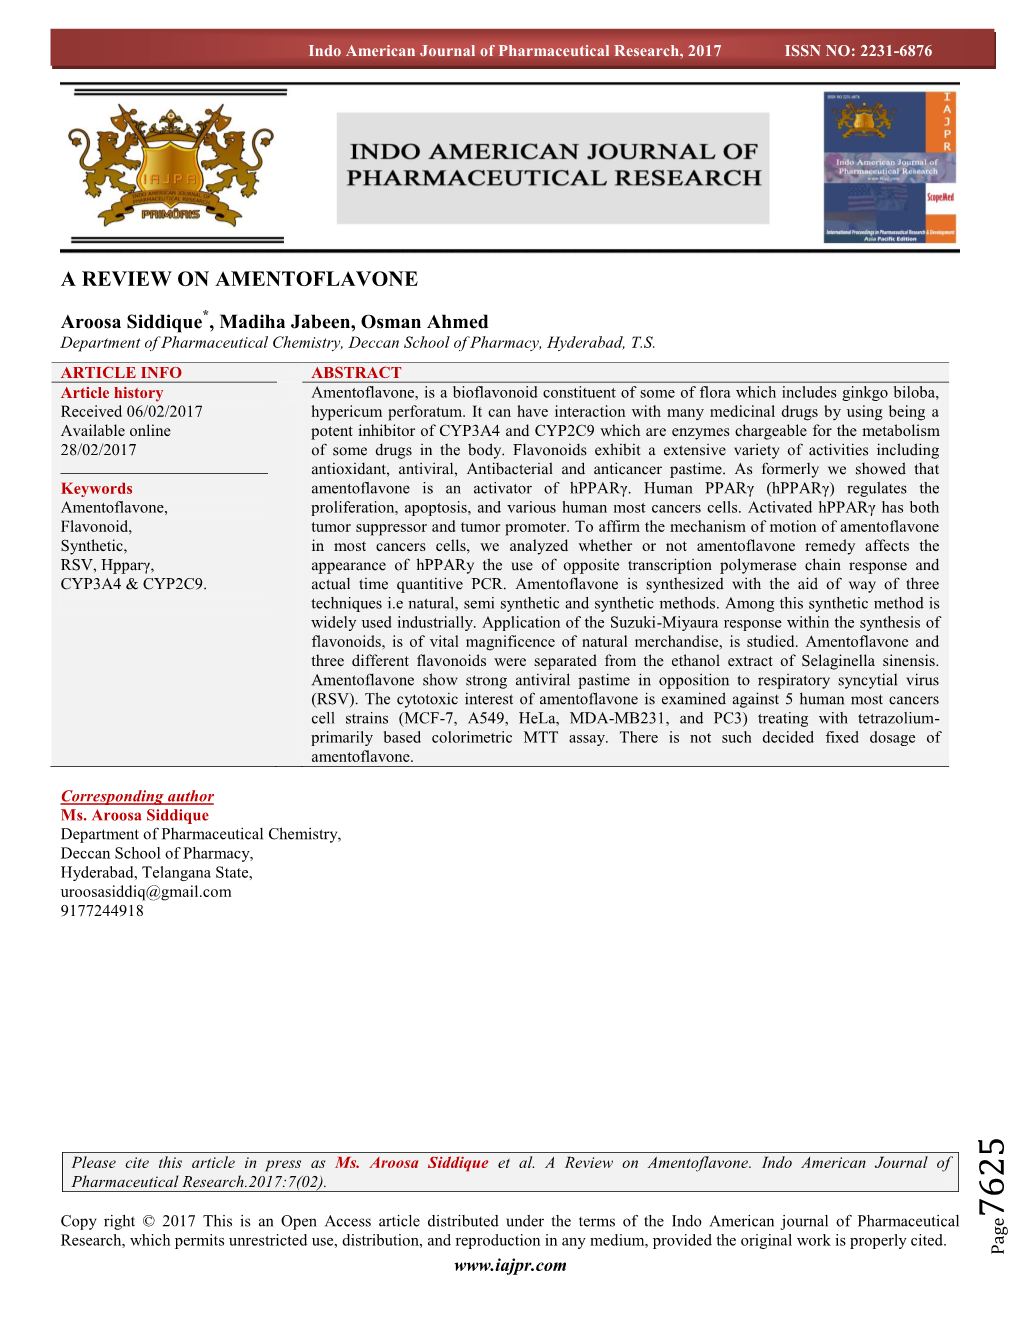 A Review on Amentoflavone